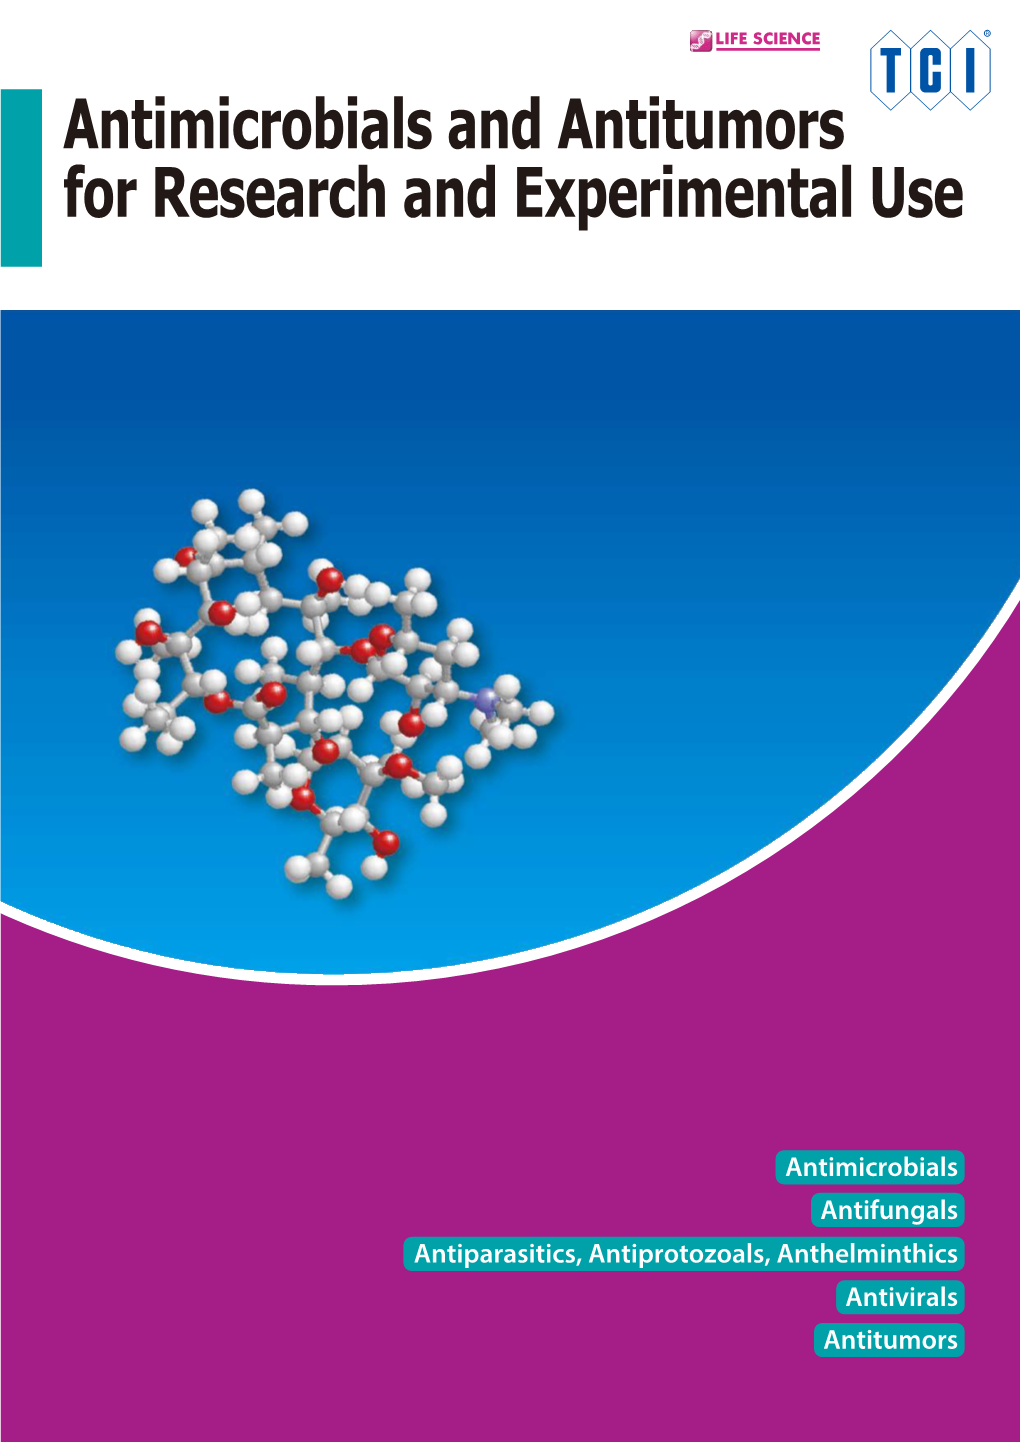 Antimicrobials & Antitumors for Research and Experimental